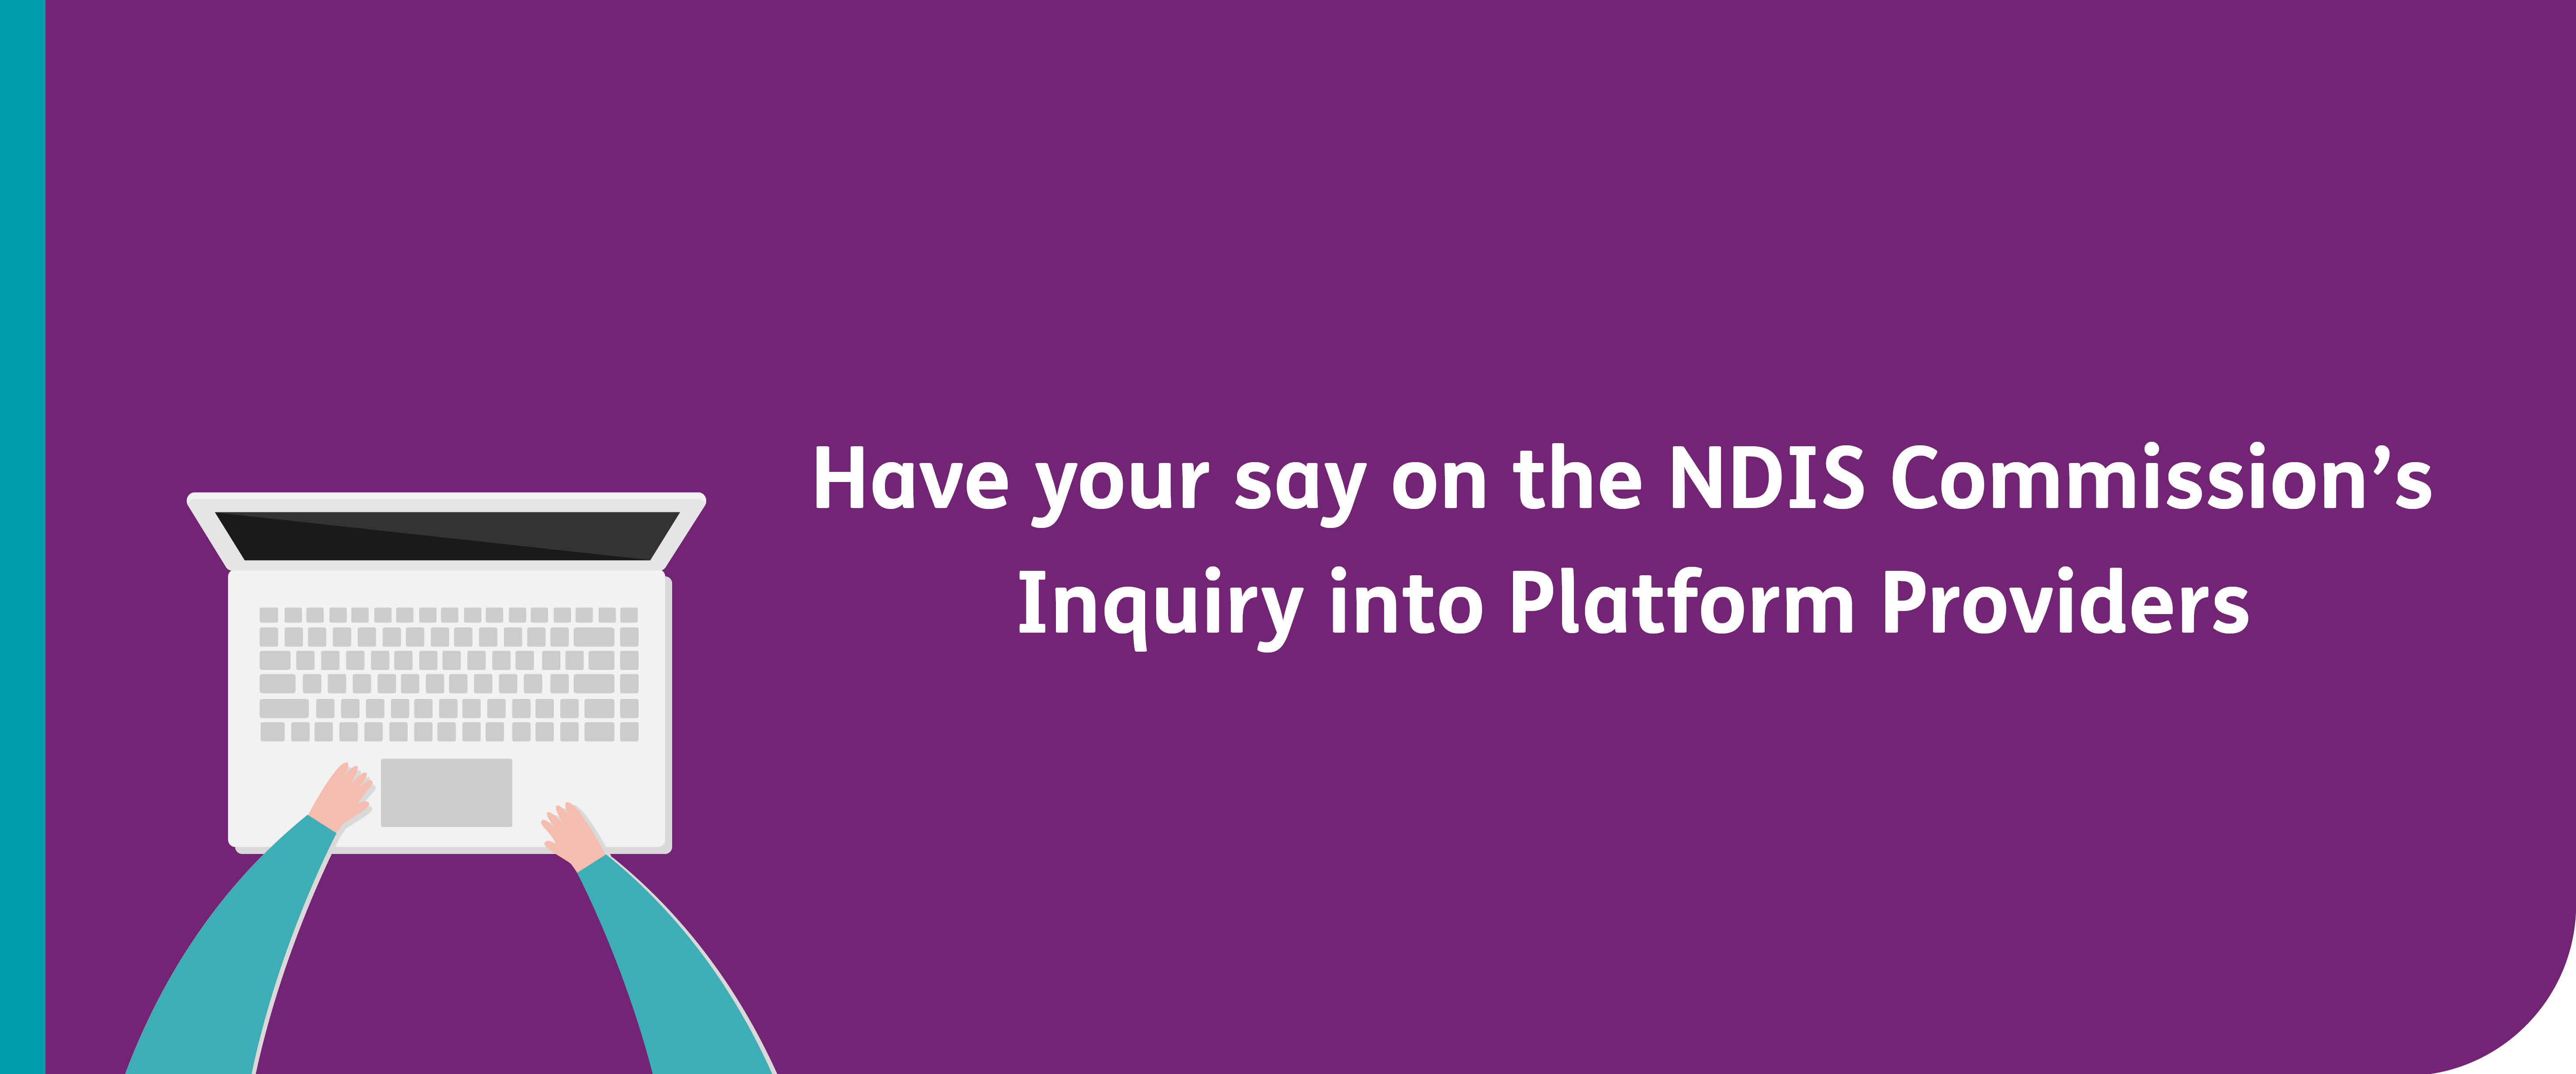 Have your say on the NDIS Commission’s Inquiry into Platform Providers with a cartoon of two hands typing on a laptop